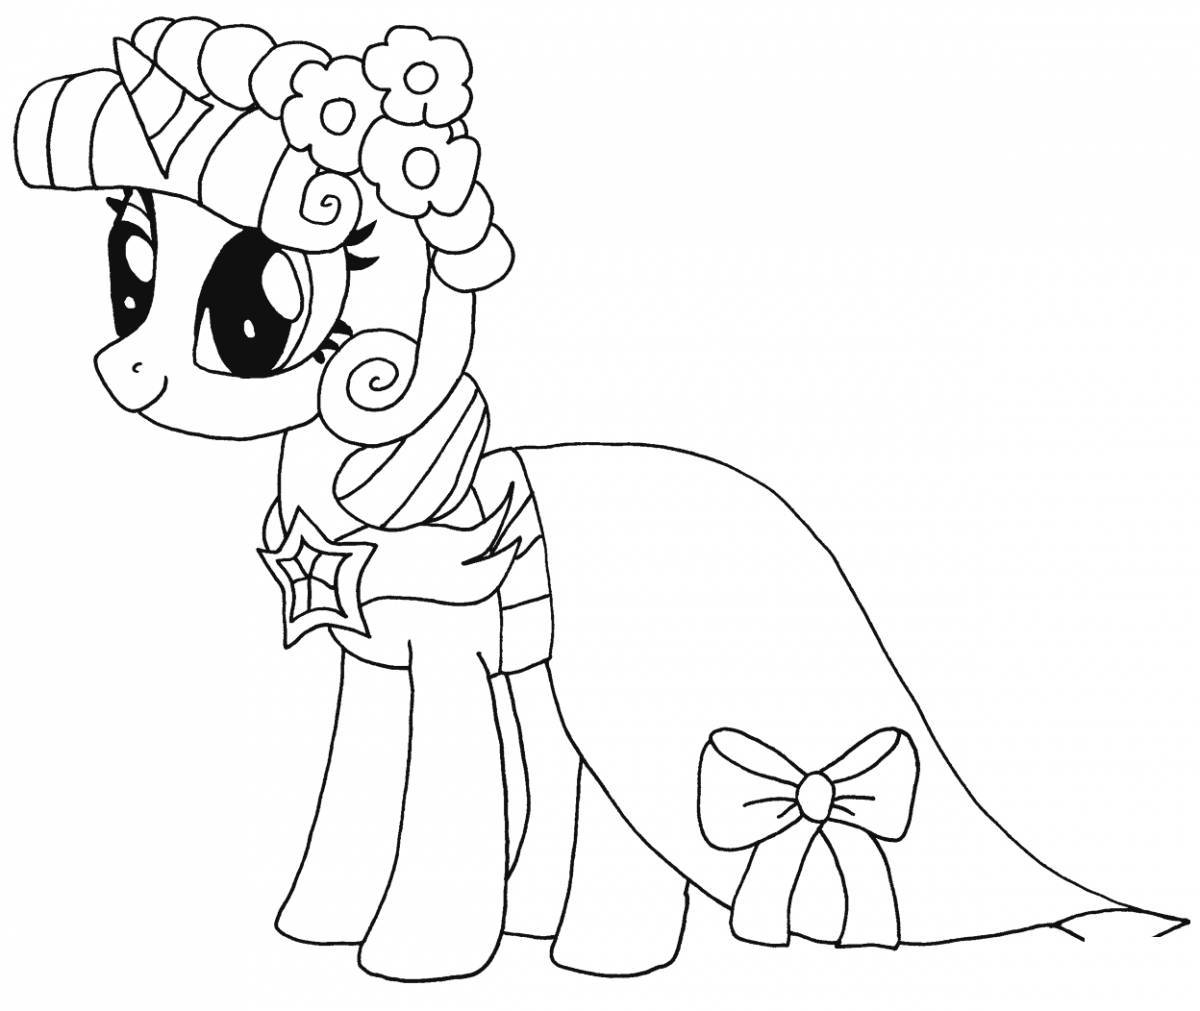 Fascinating pony sparkle coloring book